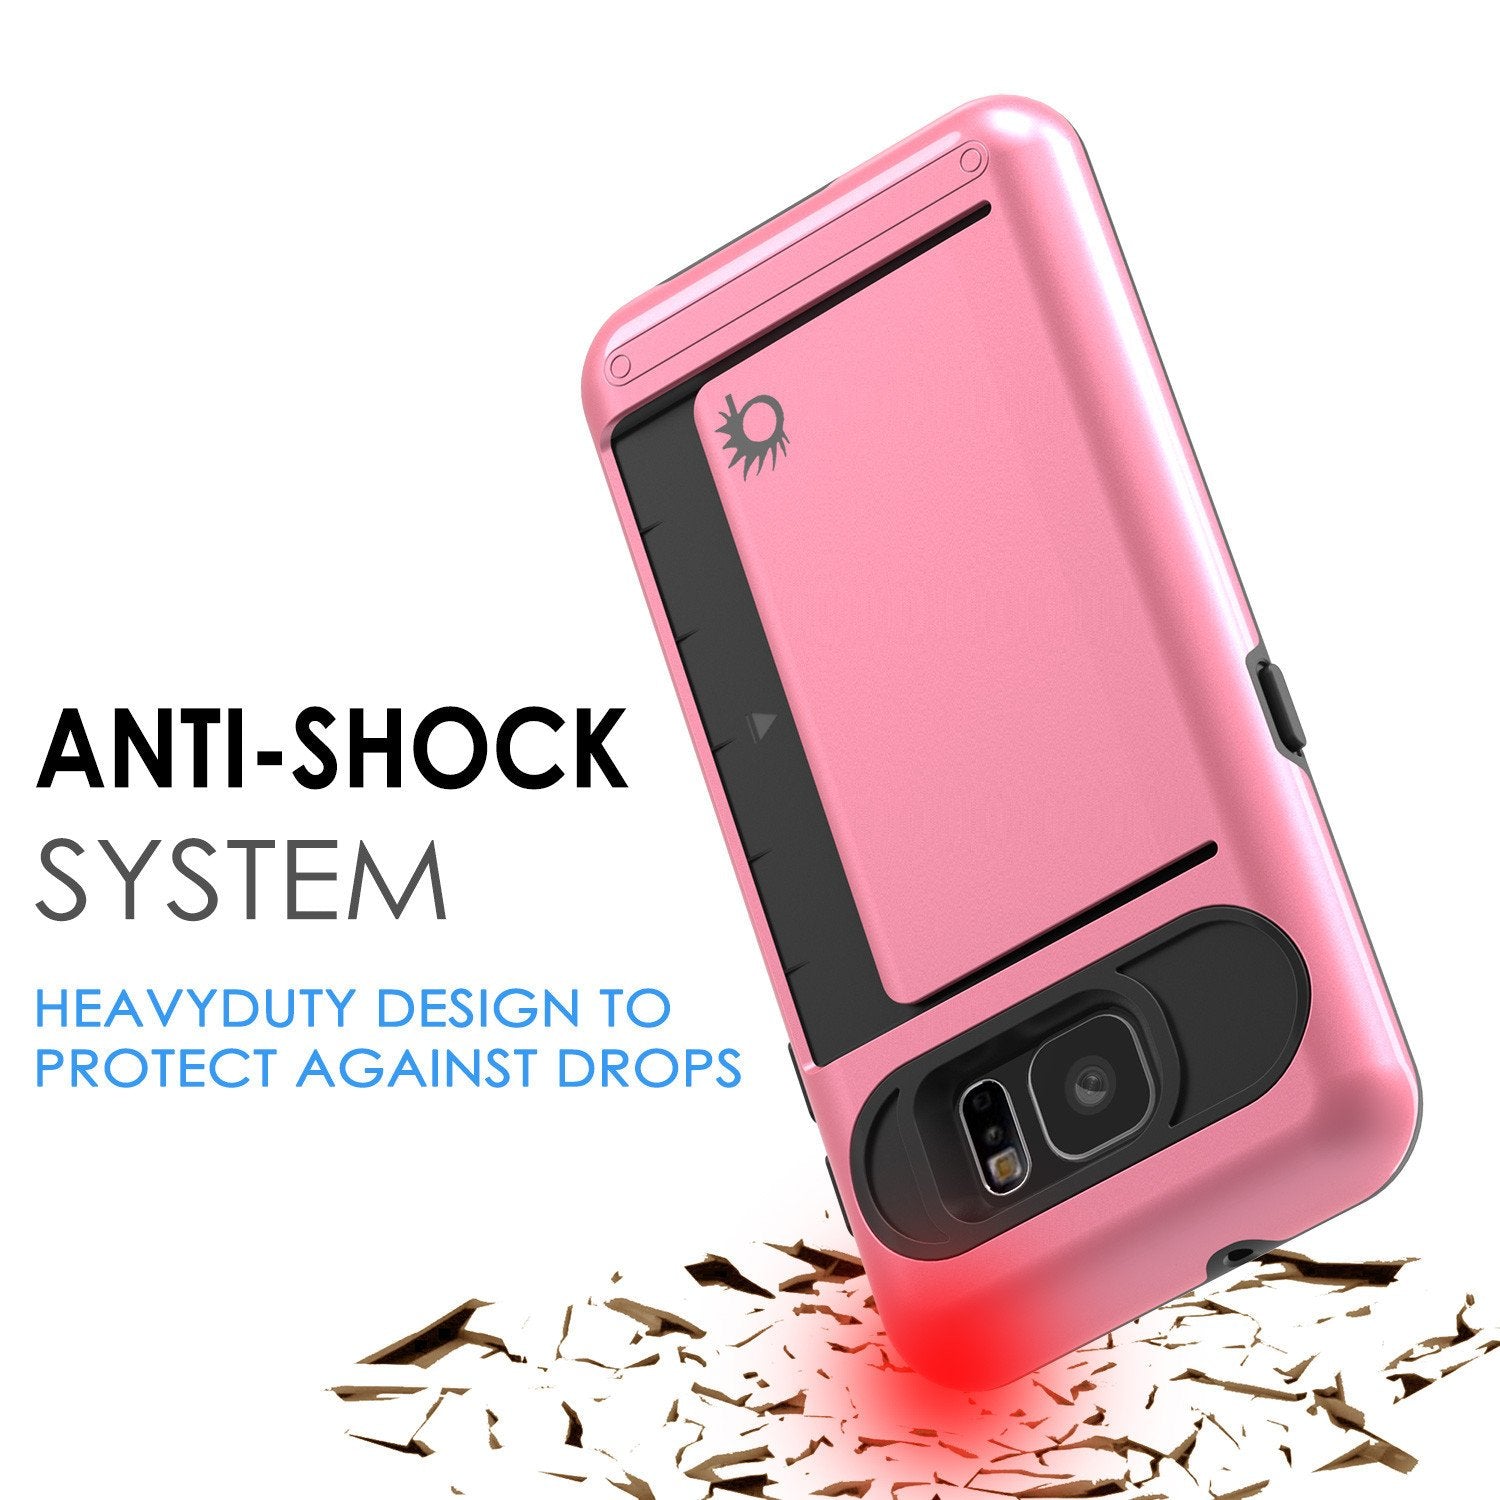 Galaxy S7 EDGE Case PunkCase CLUTCH Pink Series Slim Armor Soft Cover Case w/ Screen Protector